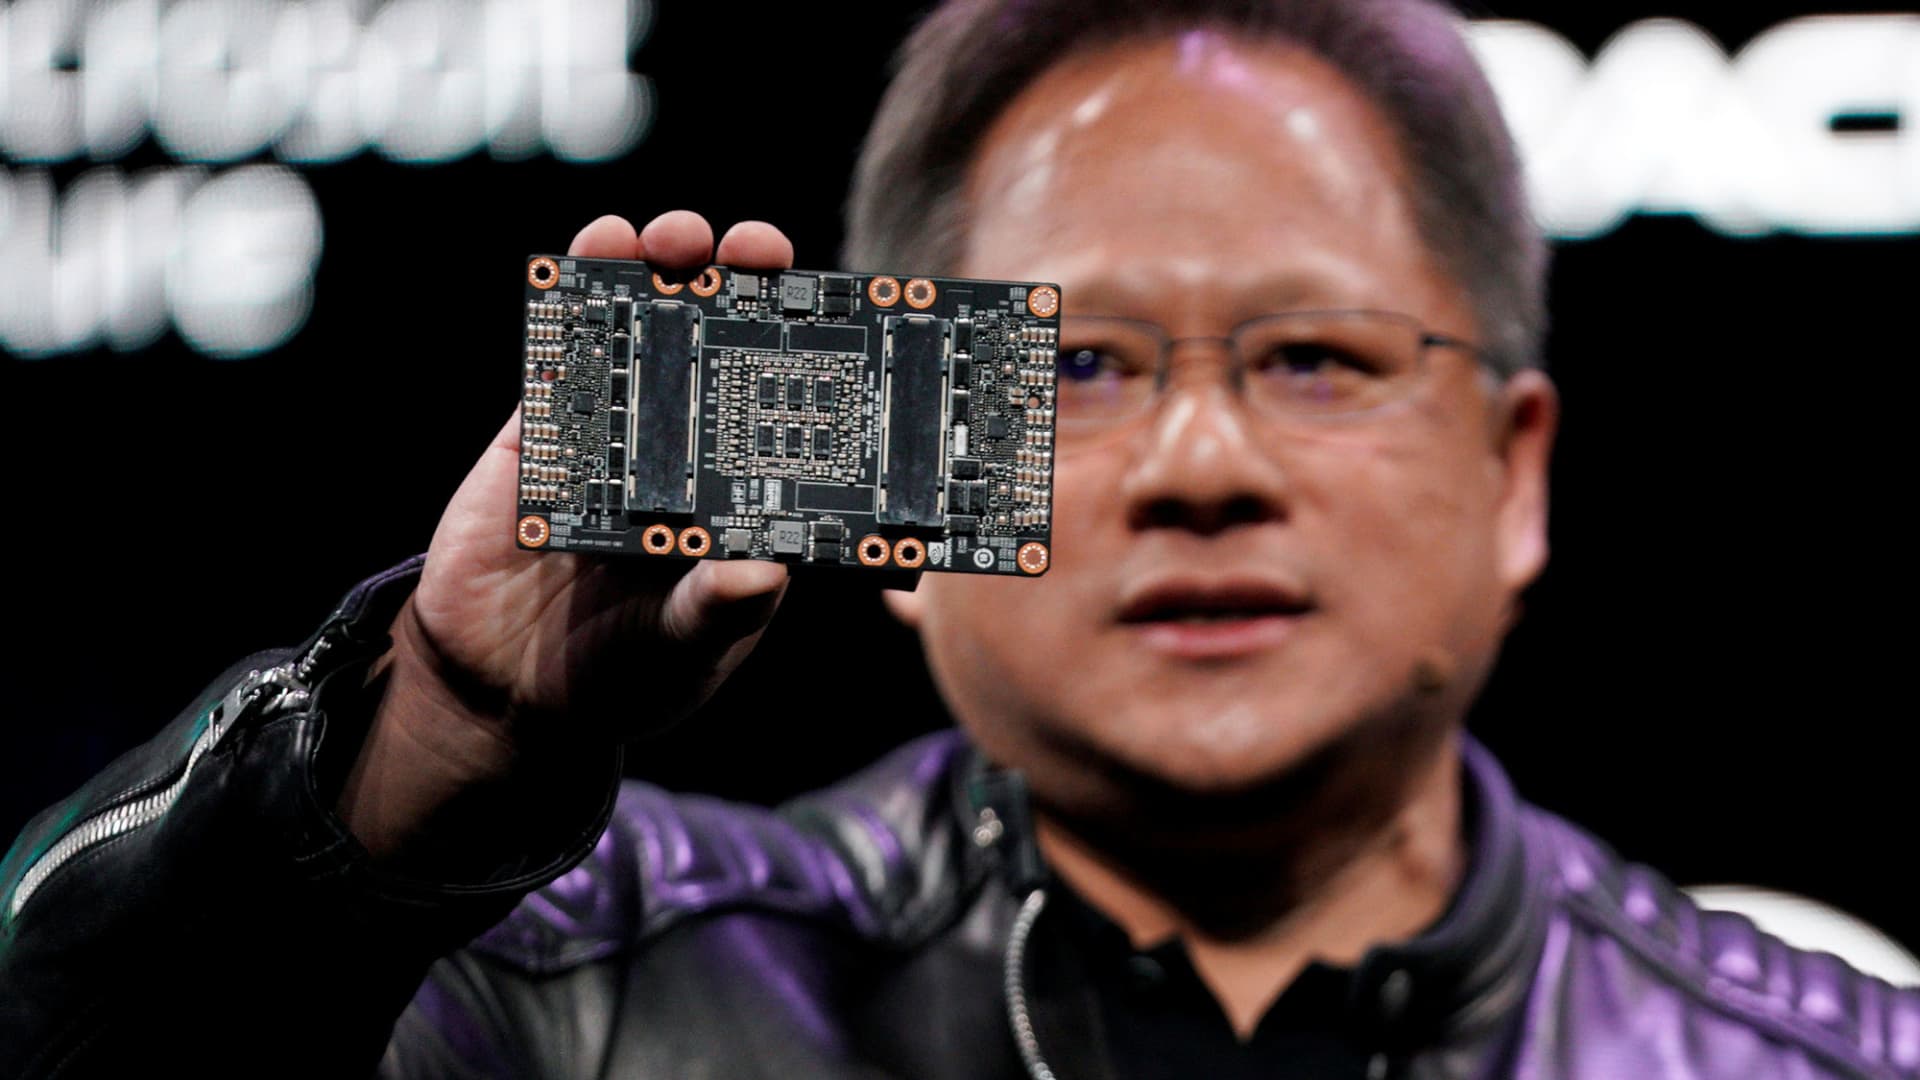 Nvidia's blowout earnings lift AMD while other chipmakers such as Intel fall